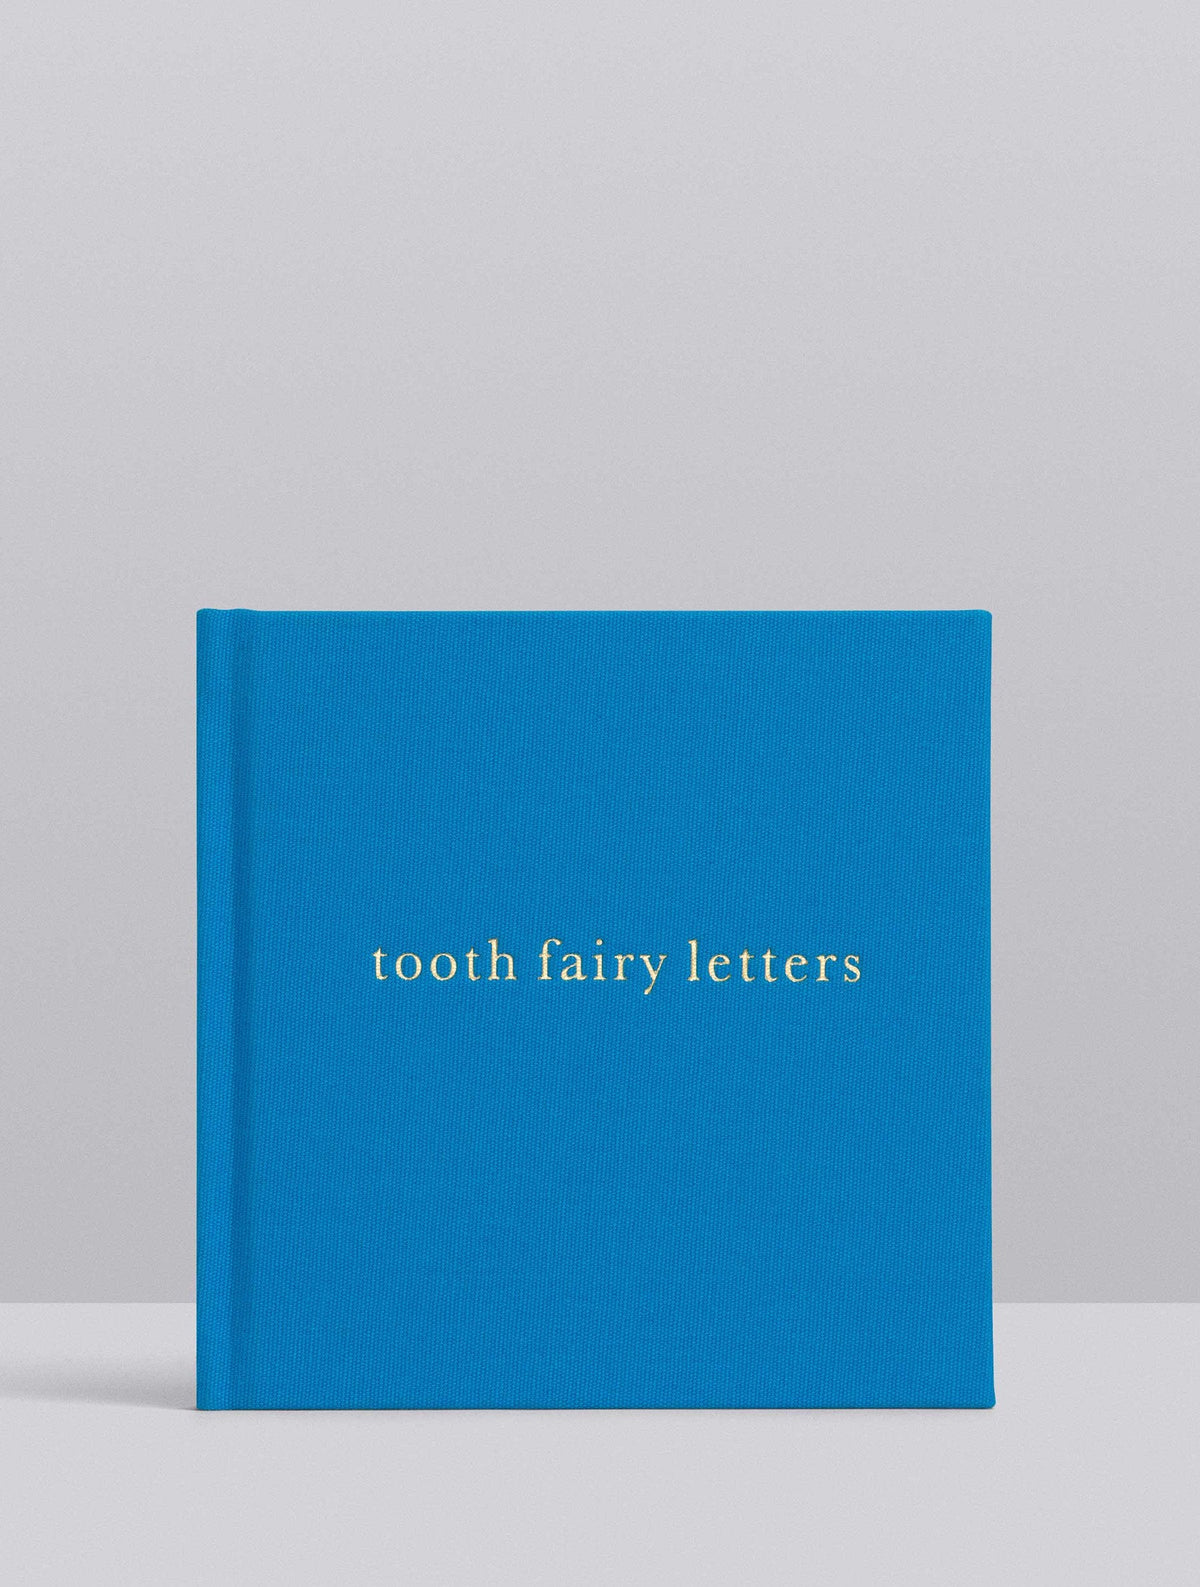 Tooth Fairy Letters. Keep One Gift One Bundle